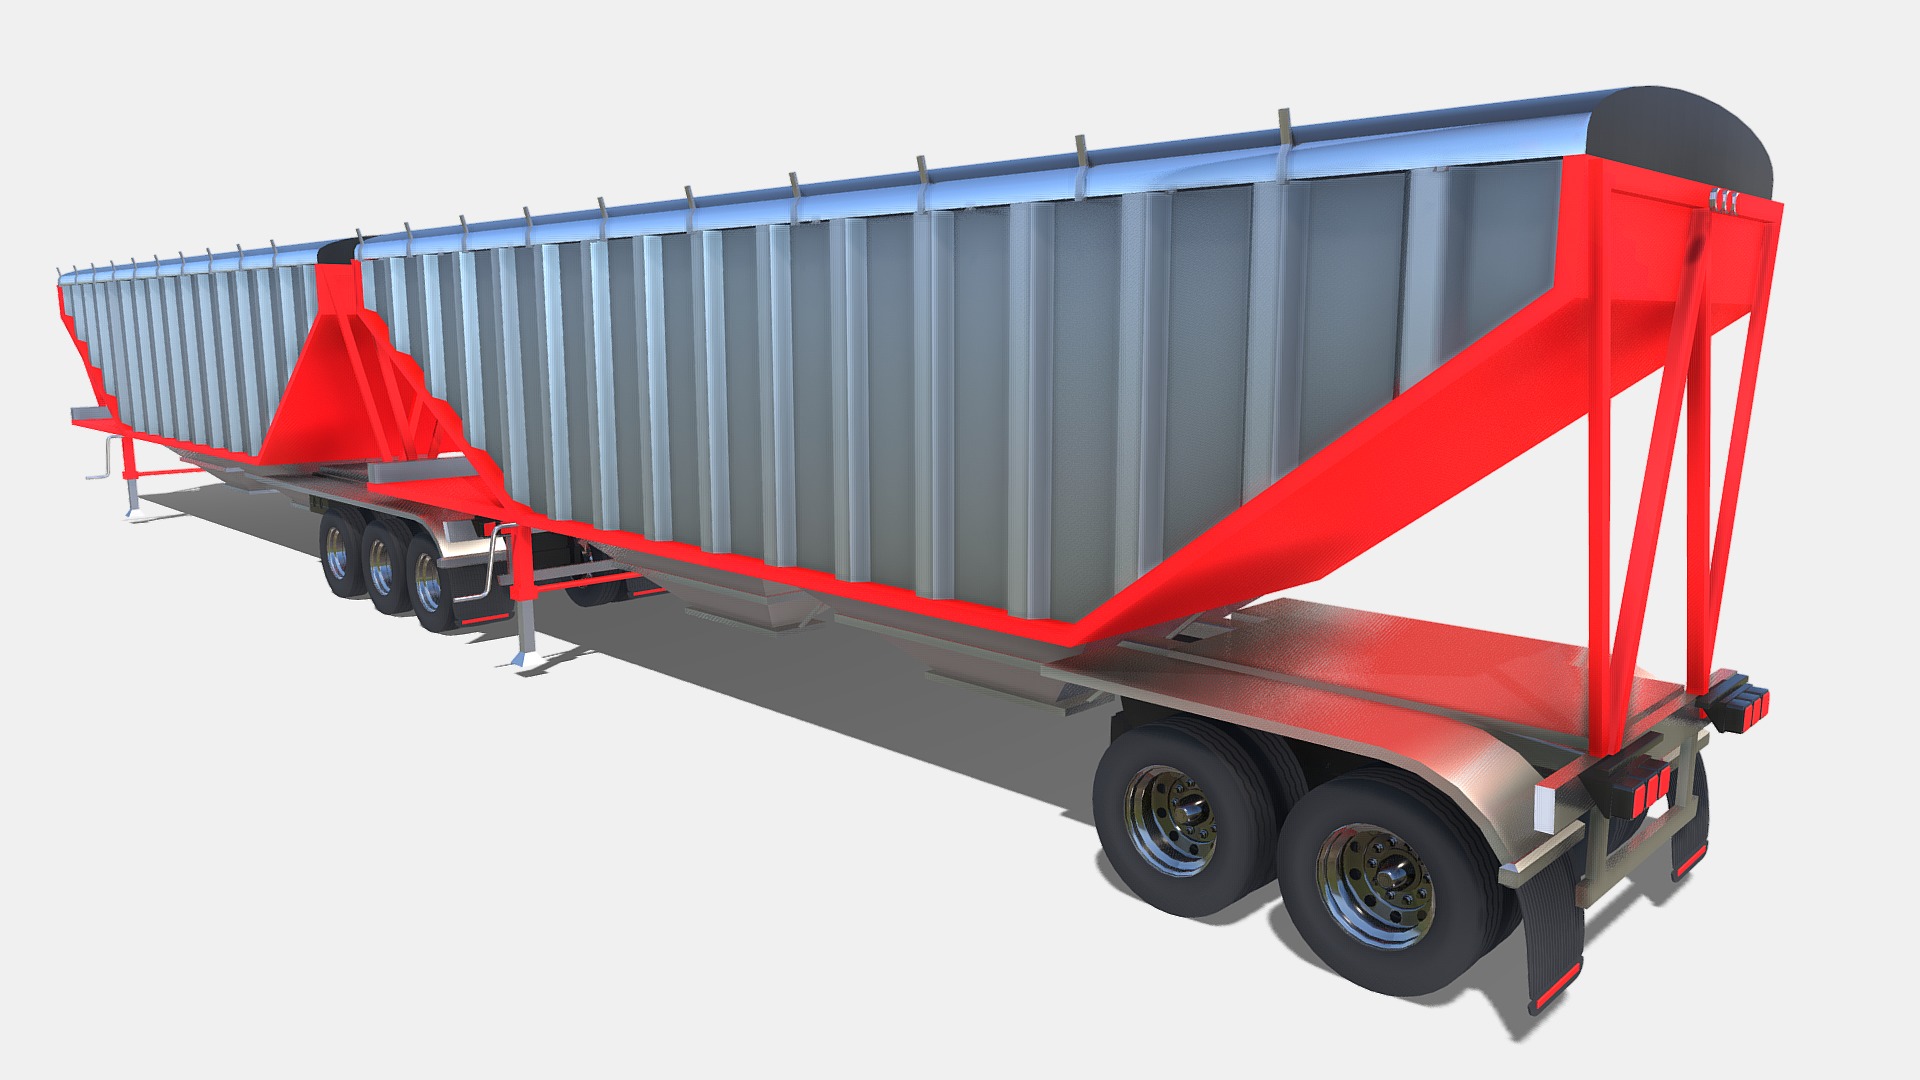 3D model Hopper - This is a 3D model of the Hopper. The 3D model is about a red and white trailer.